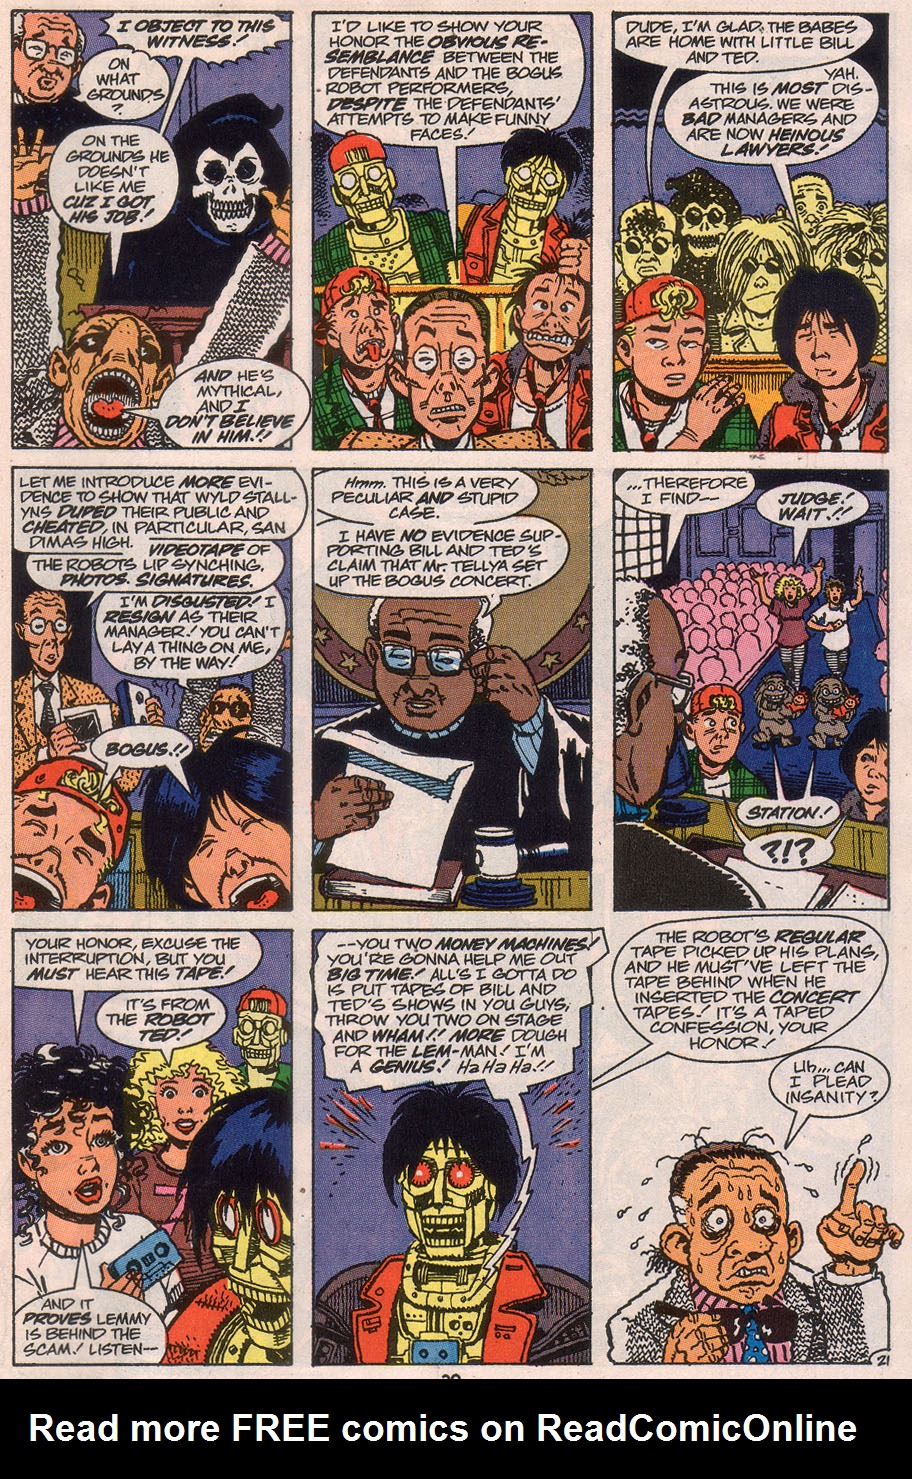 Read online Bill & Ted's Excellent Comic Book comic -  Issue #3 - 31